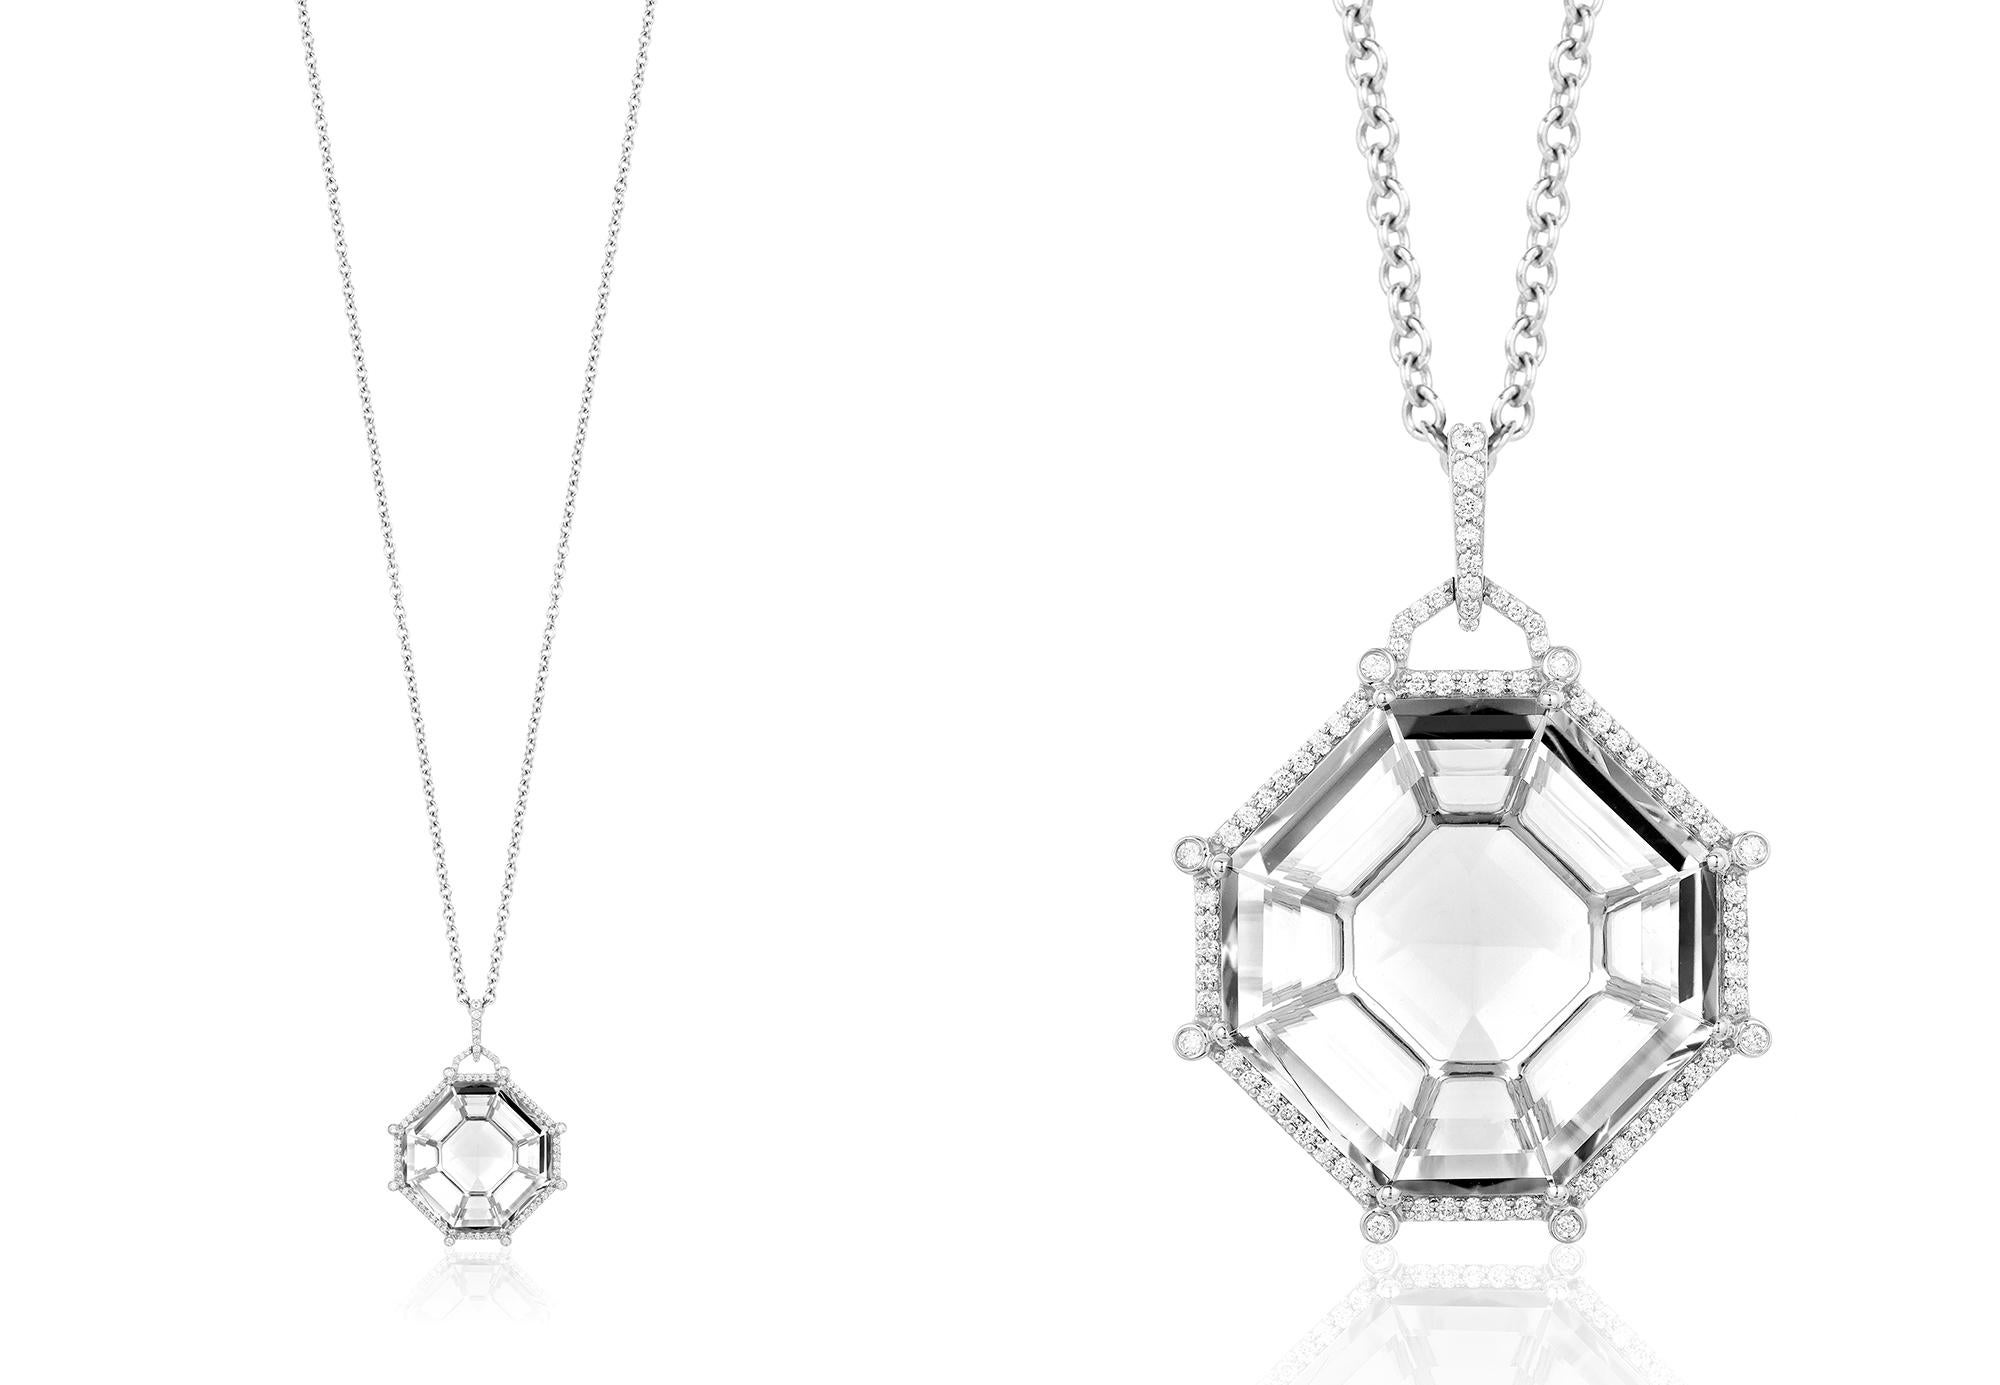 Rock Crystal Octagon Pendant in 18K White Gold with Diamonds, from 'Gossip' Collection

Stone Size: 22.80 x 22.80 mm

Gemstone Approx Wt: Rock Crystal- 23.92 Carats.

Diamonds: G-H / VS, Approx. Wt: 0.45 Carats

*Chain included.